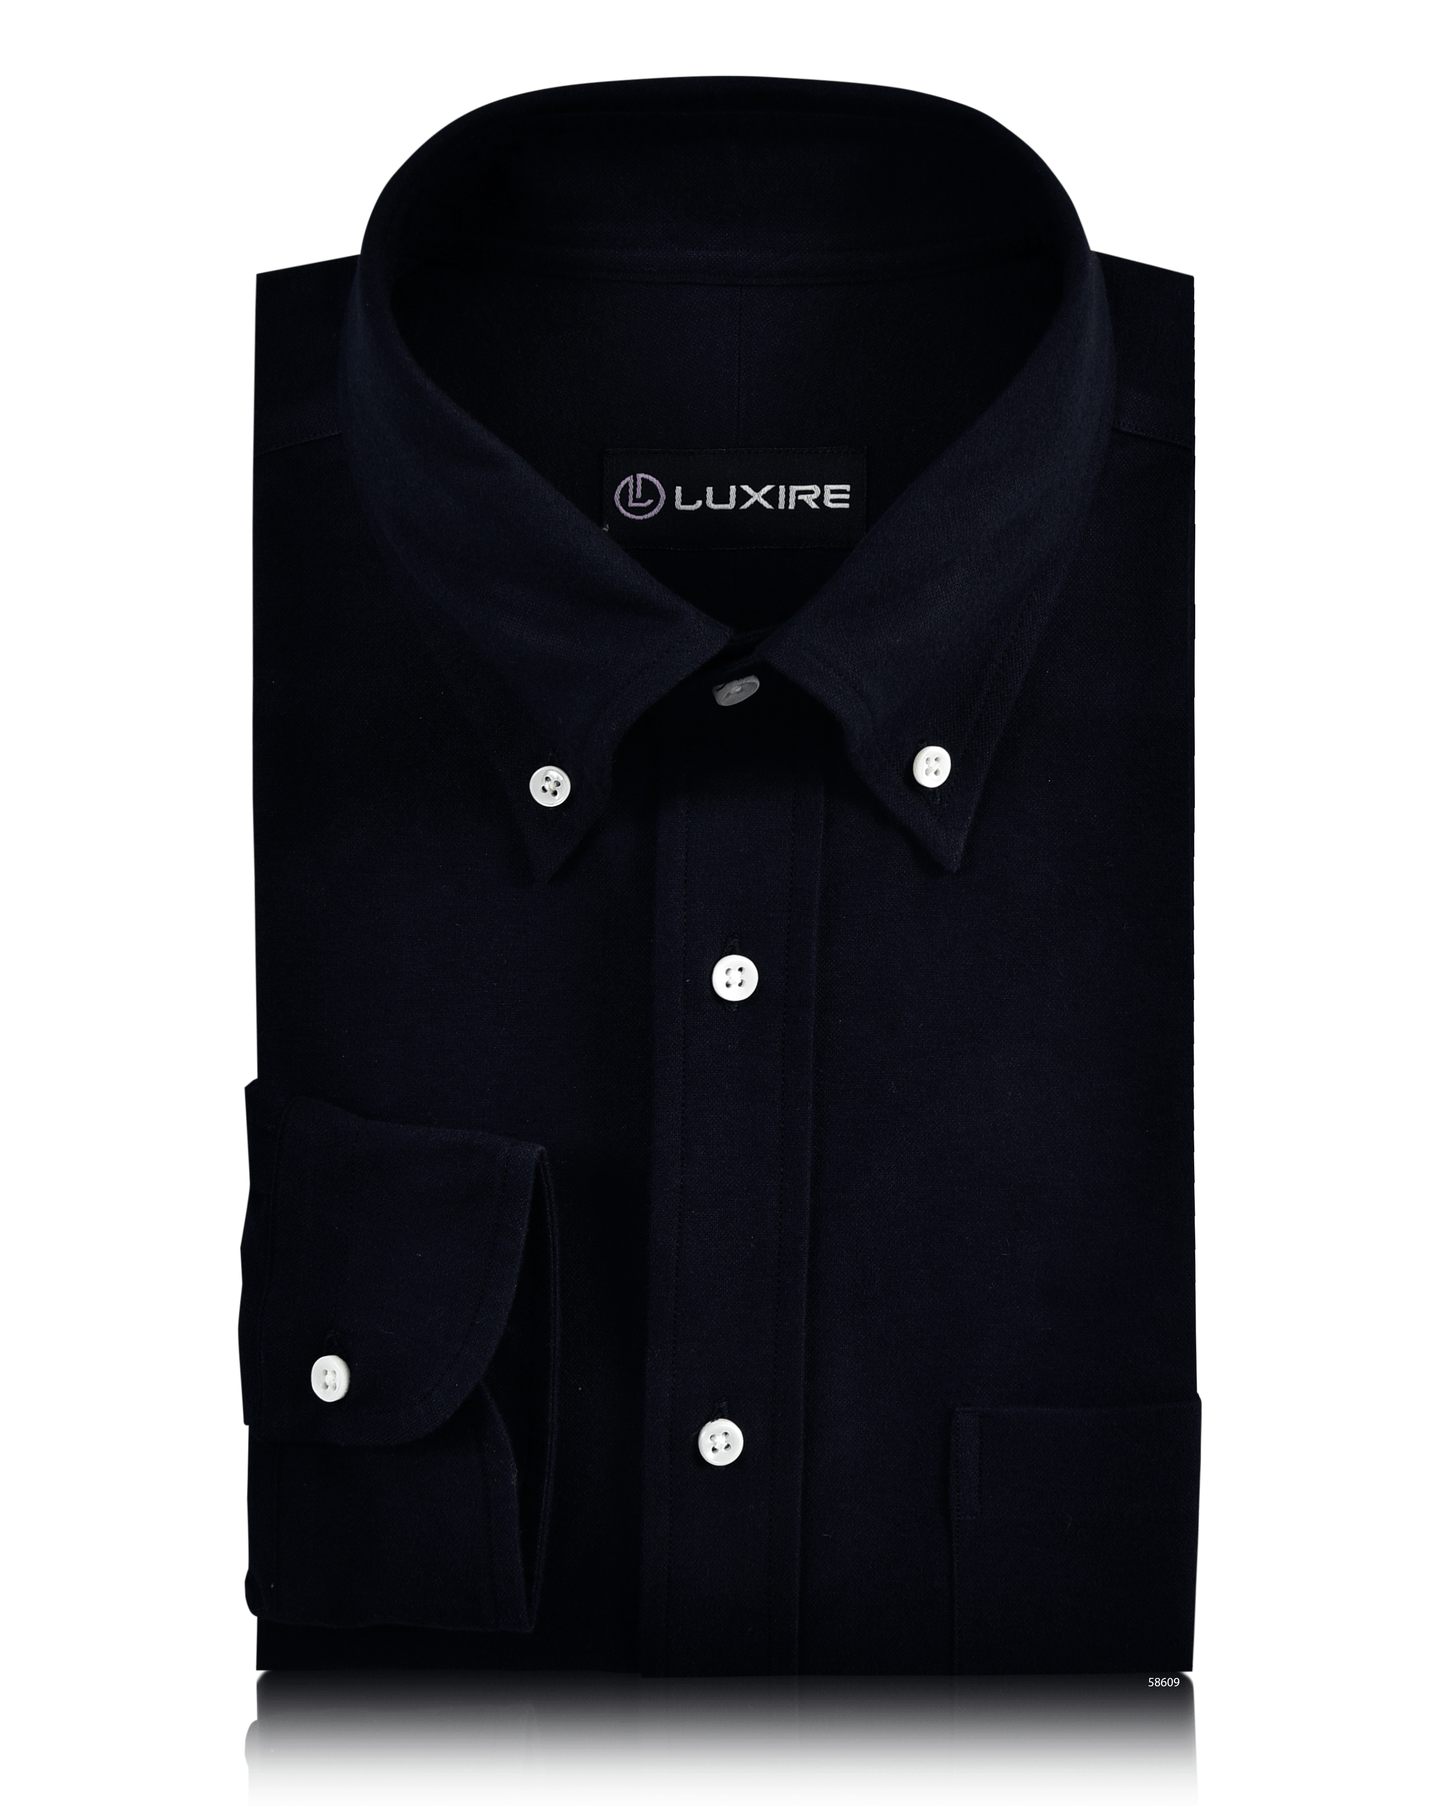 Front of the custom oxford shirt for men by Luxire in midnight navy